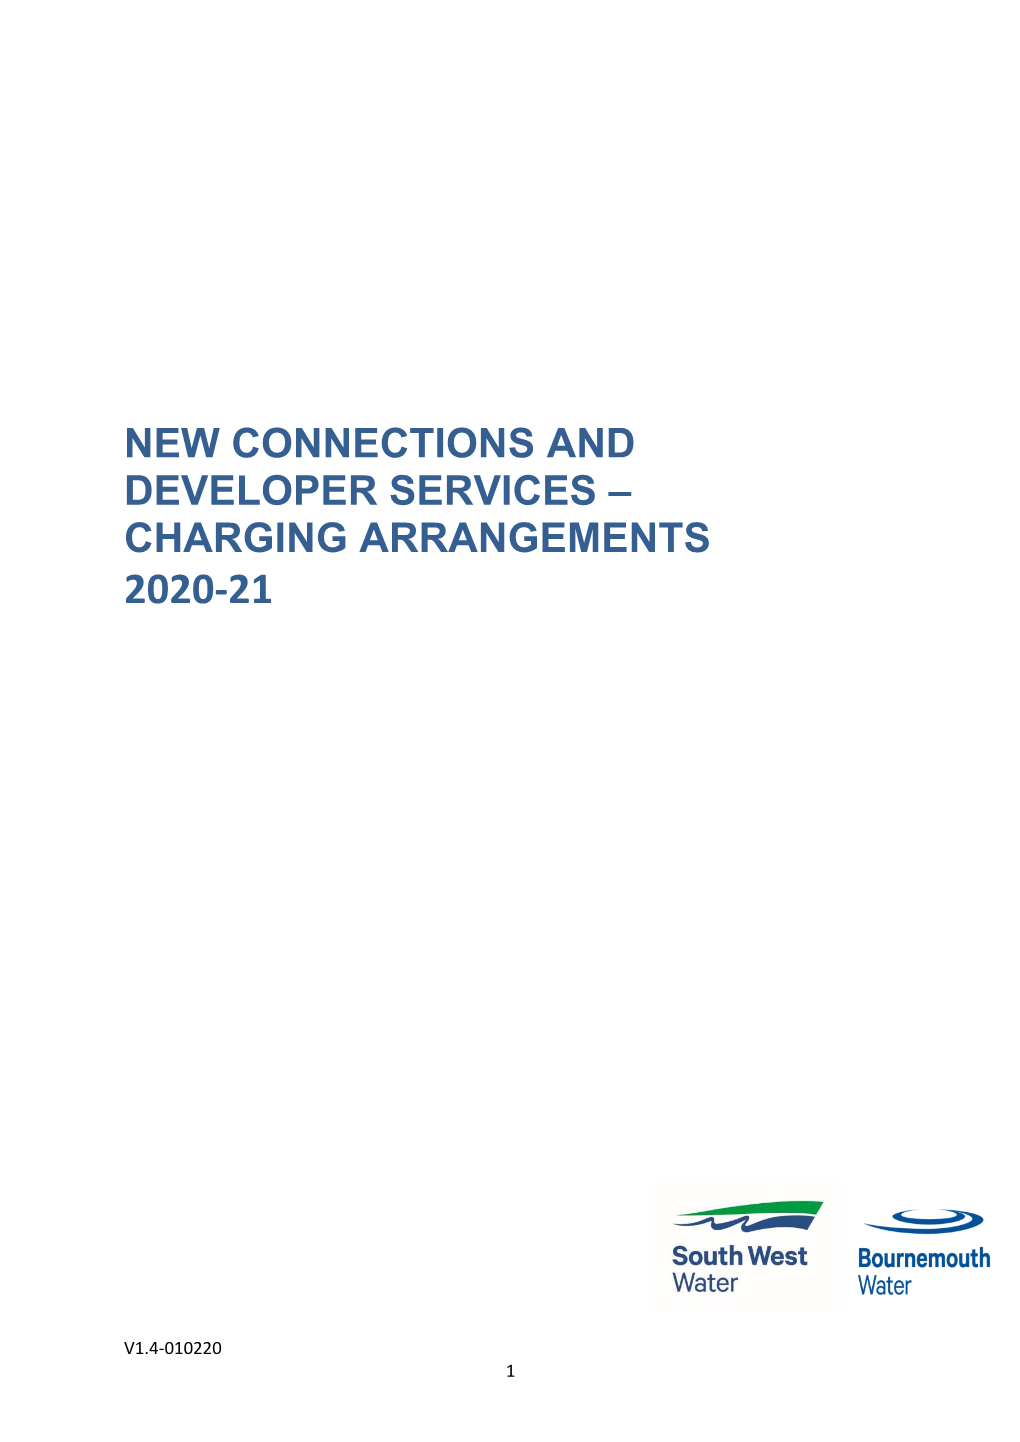 New Connections and Developer Services – Charging Arrangements 2020-21